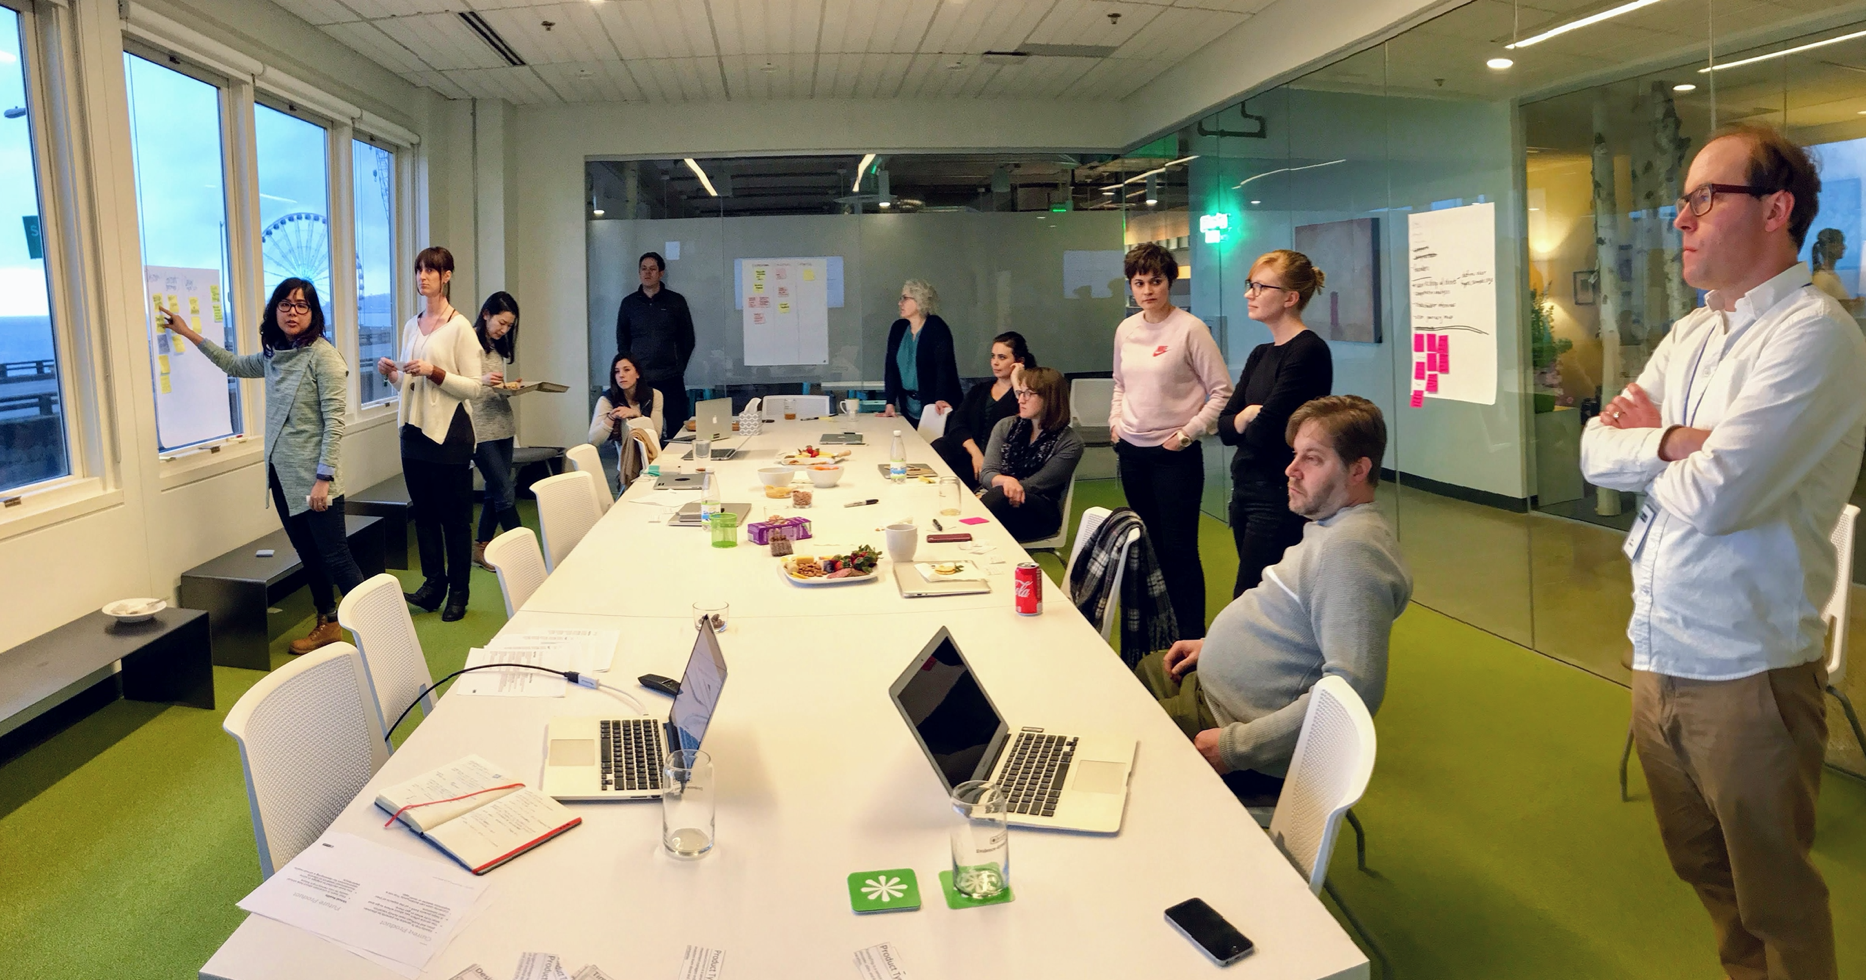 Is collaboration a thing of the past? Photo of group of people in a room working together. Really nice green carpet and view of Bell Harbor